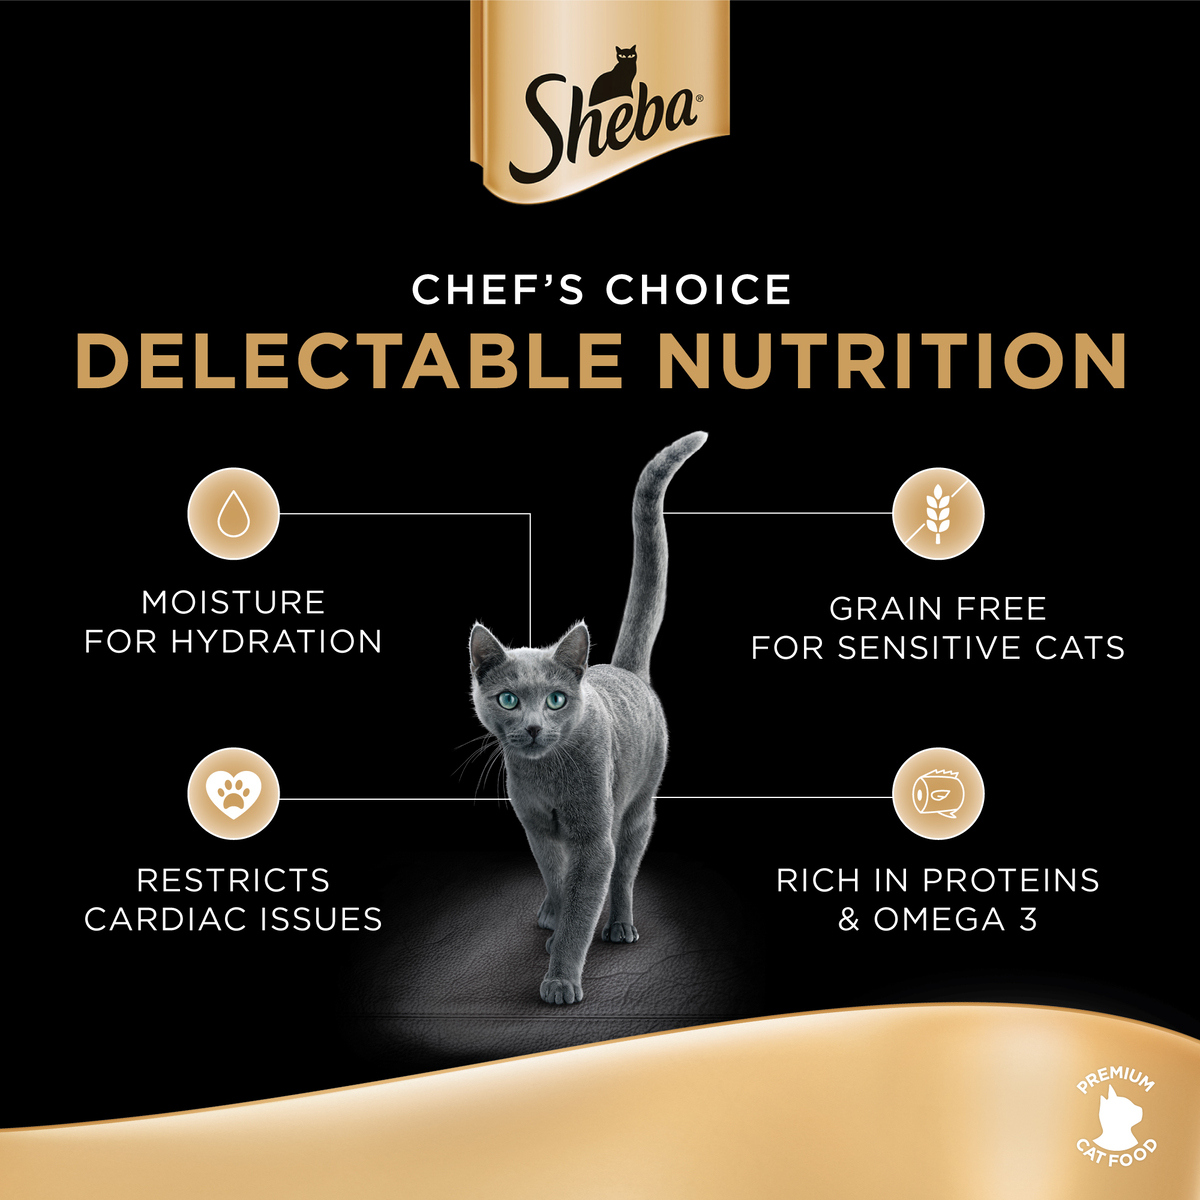 Sheba Tuna White Meat with Snapper Cat Food 24 x 85 g